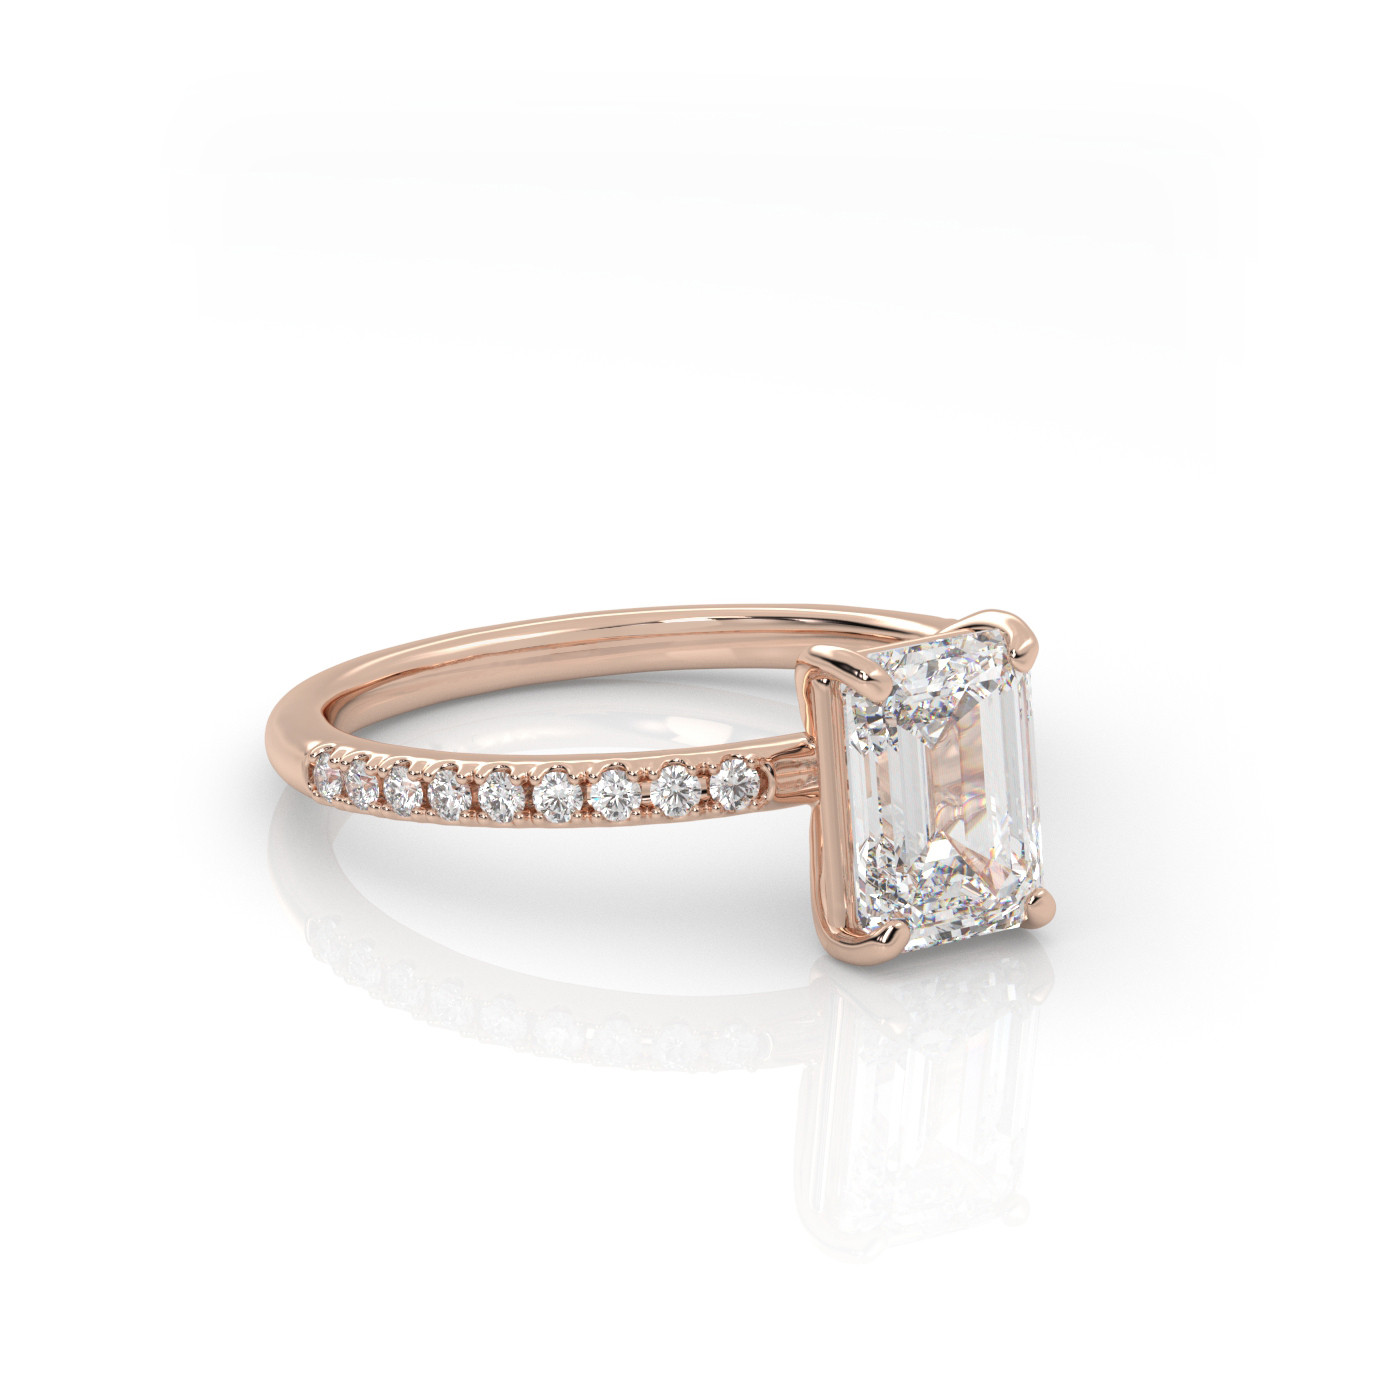 18K ROSE GOLD Emerald Diamond Cut Solitaire Engagement Ring with Pave Band